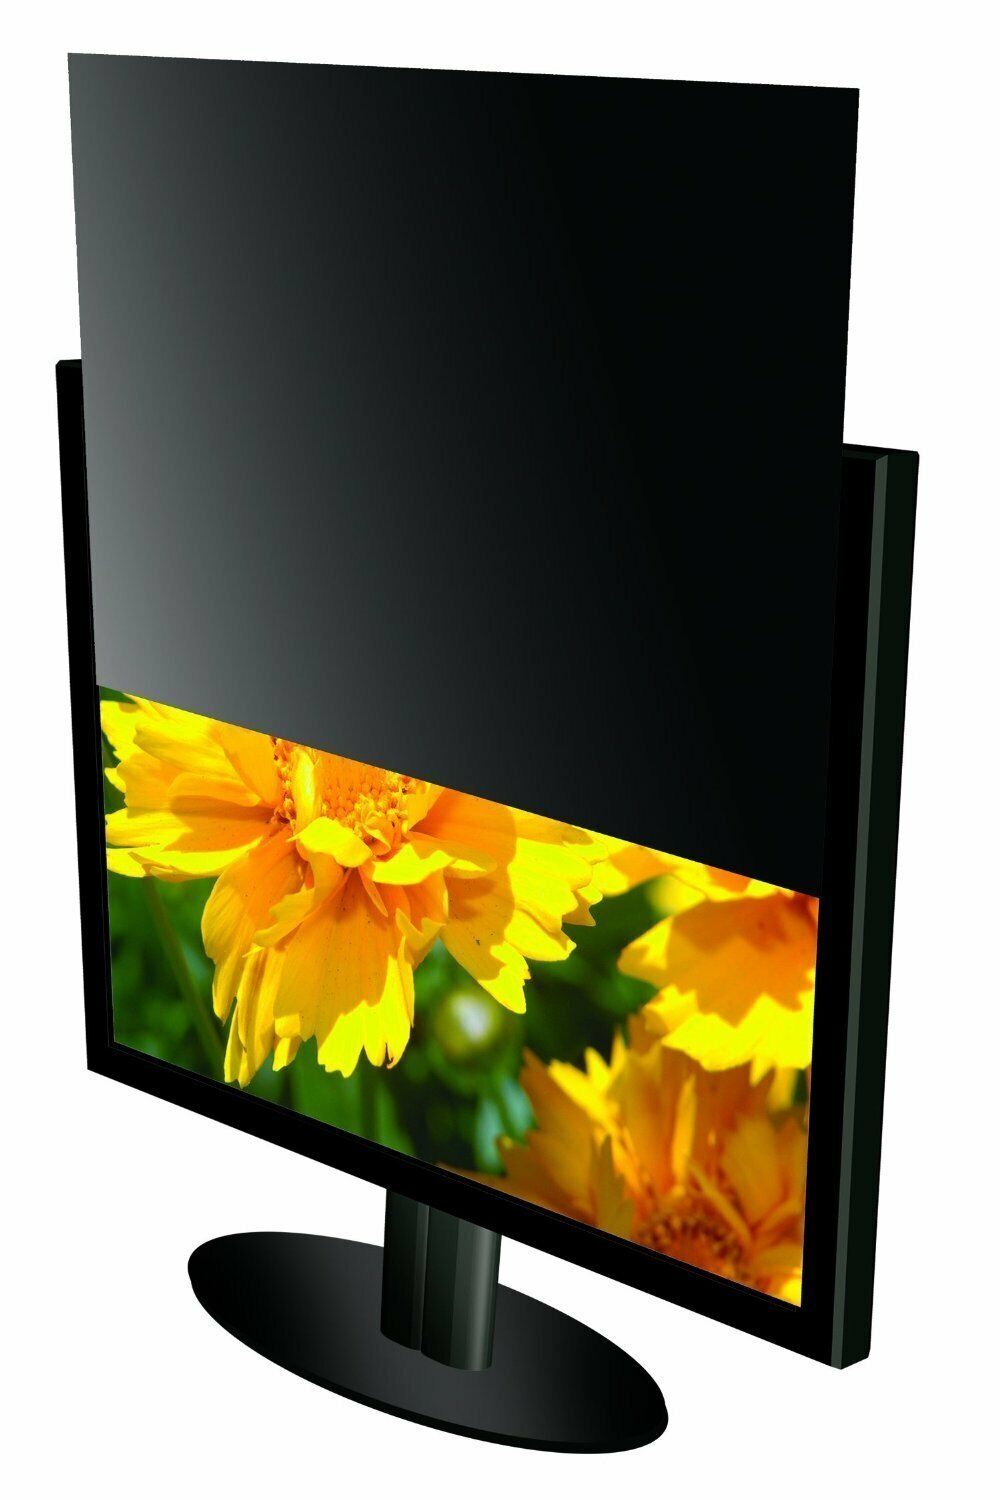 Kantek Secure-View Blackout Privacy Filter for 20-Inch Standard LCD Monitors